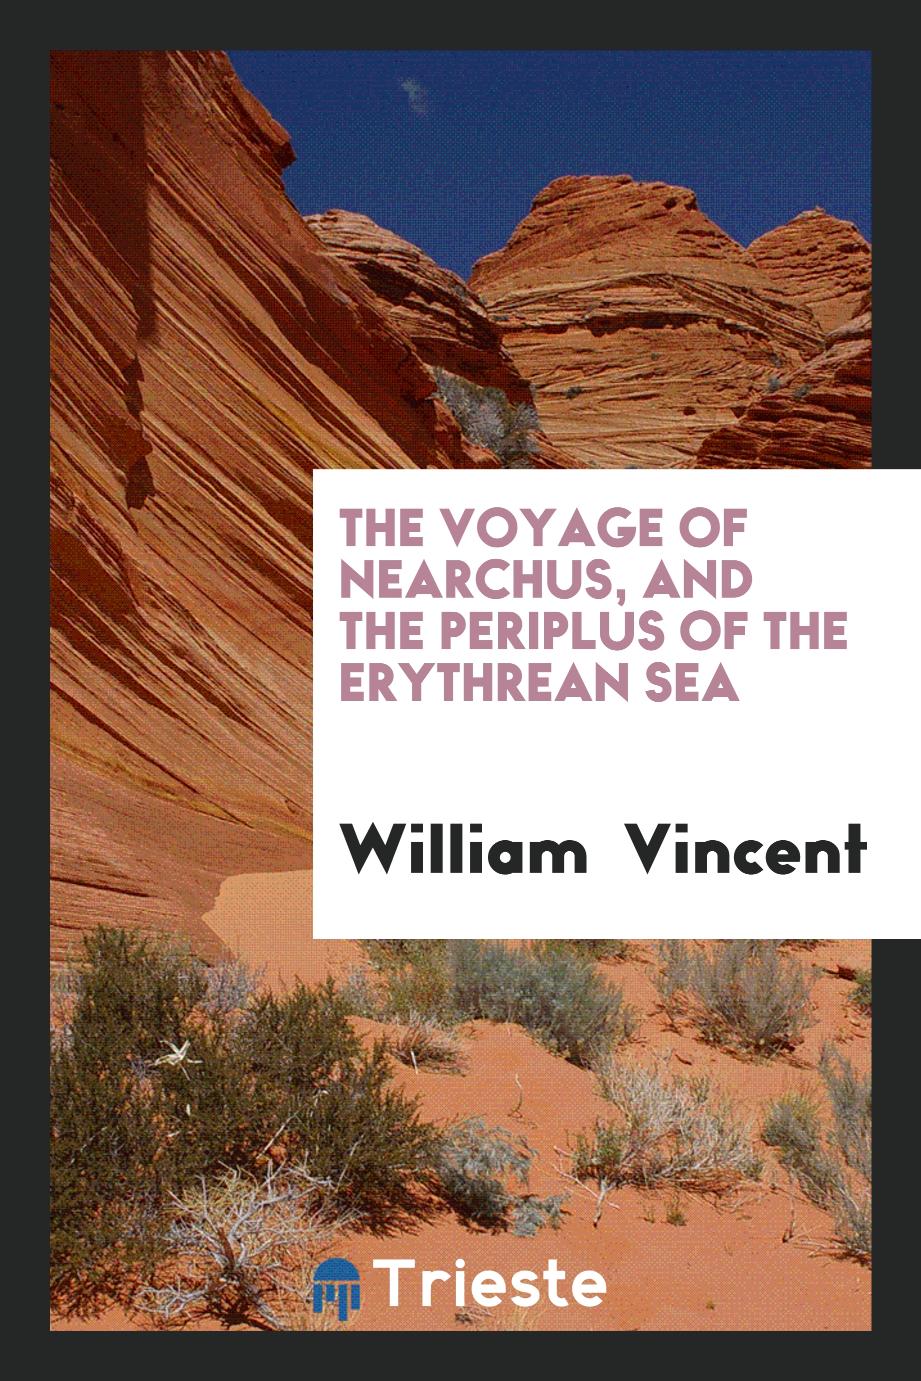 The Voyage of Nearchus, and the Periplus of the Erythrean Sea